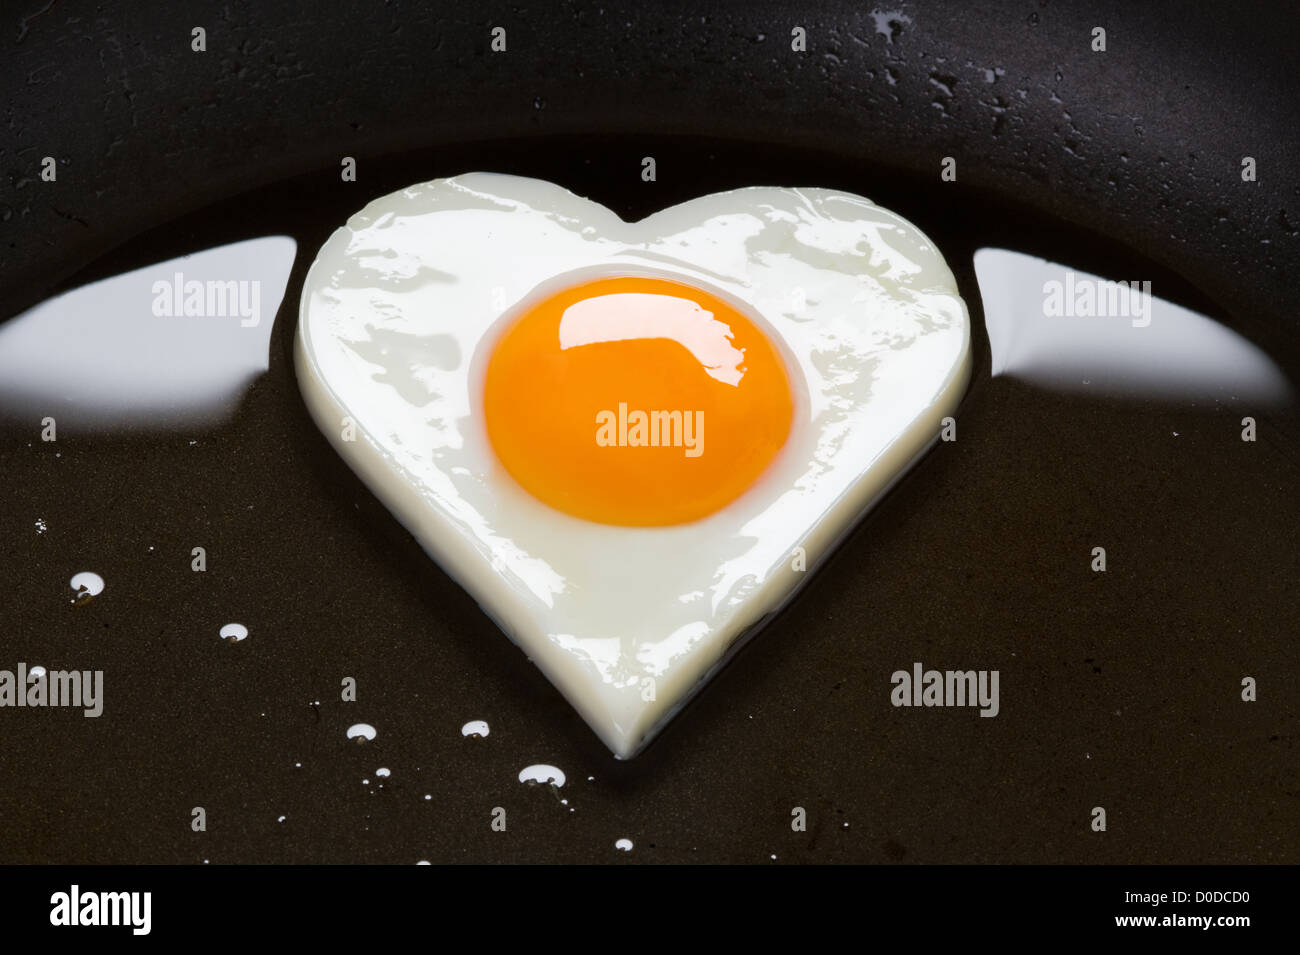 fried egg. heart shaped hens egg cooking in oil in a frying pan to make fried egg in the shape of a heart Stock Photo